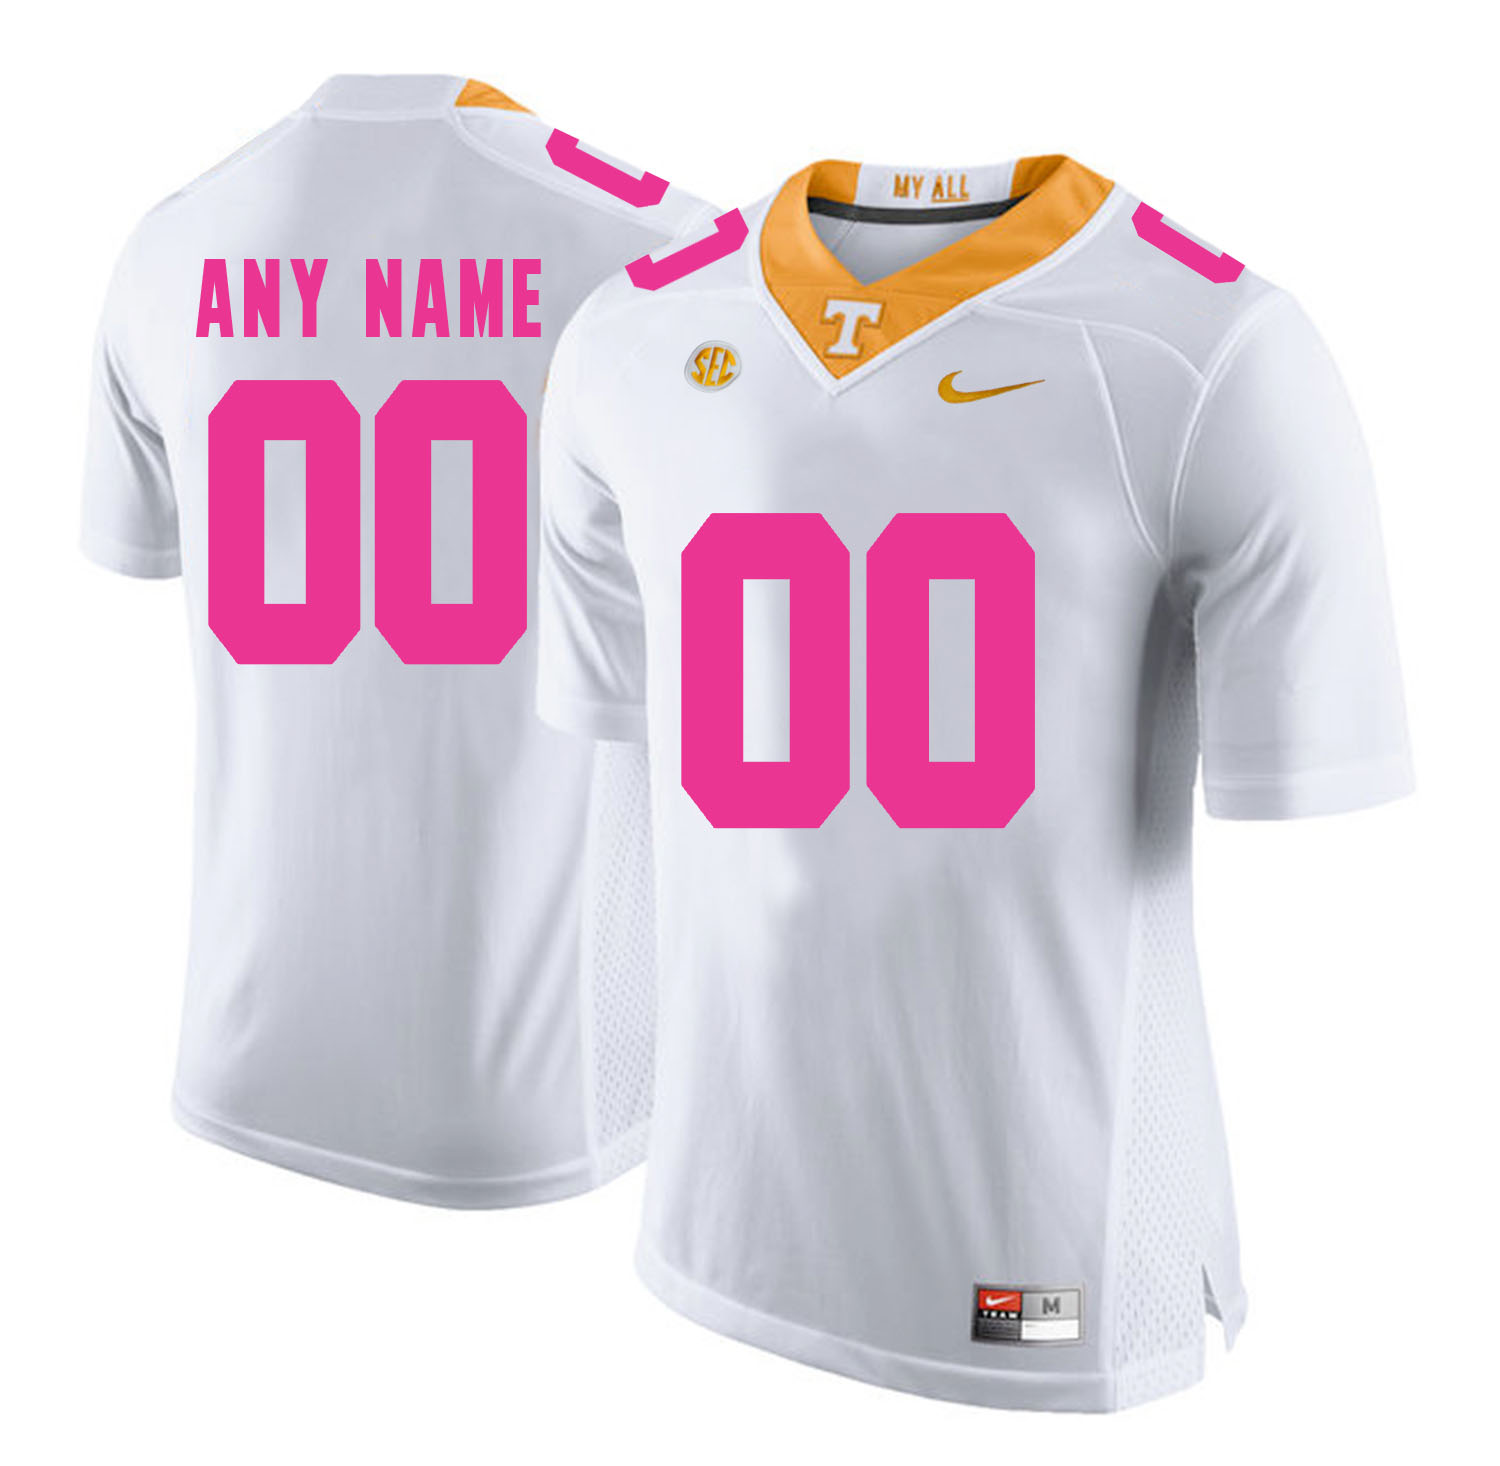 Tennessee Volunteers White Men's Customized 2018 Breast Cancer Awareness College Football Jersey